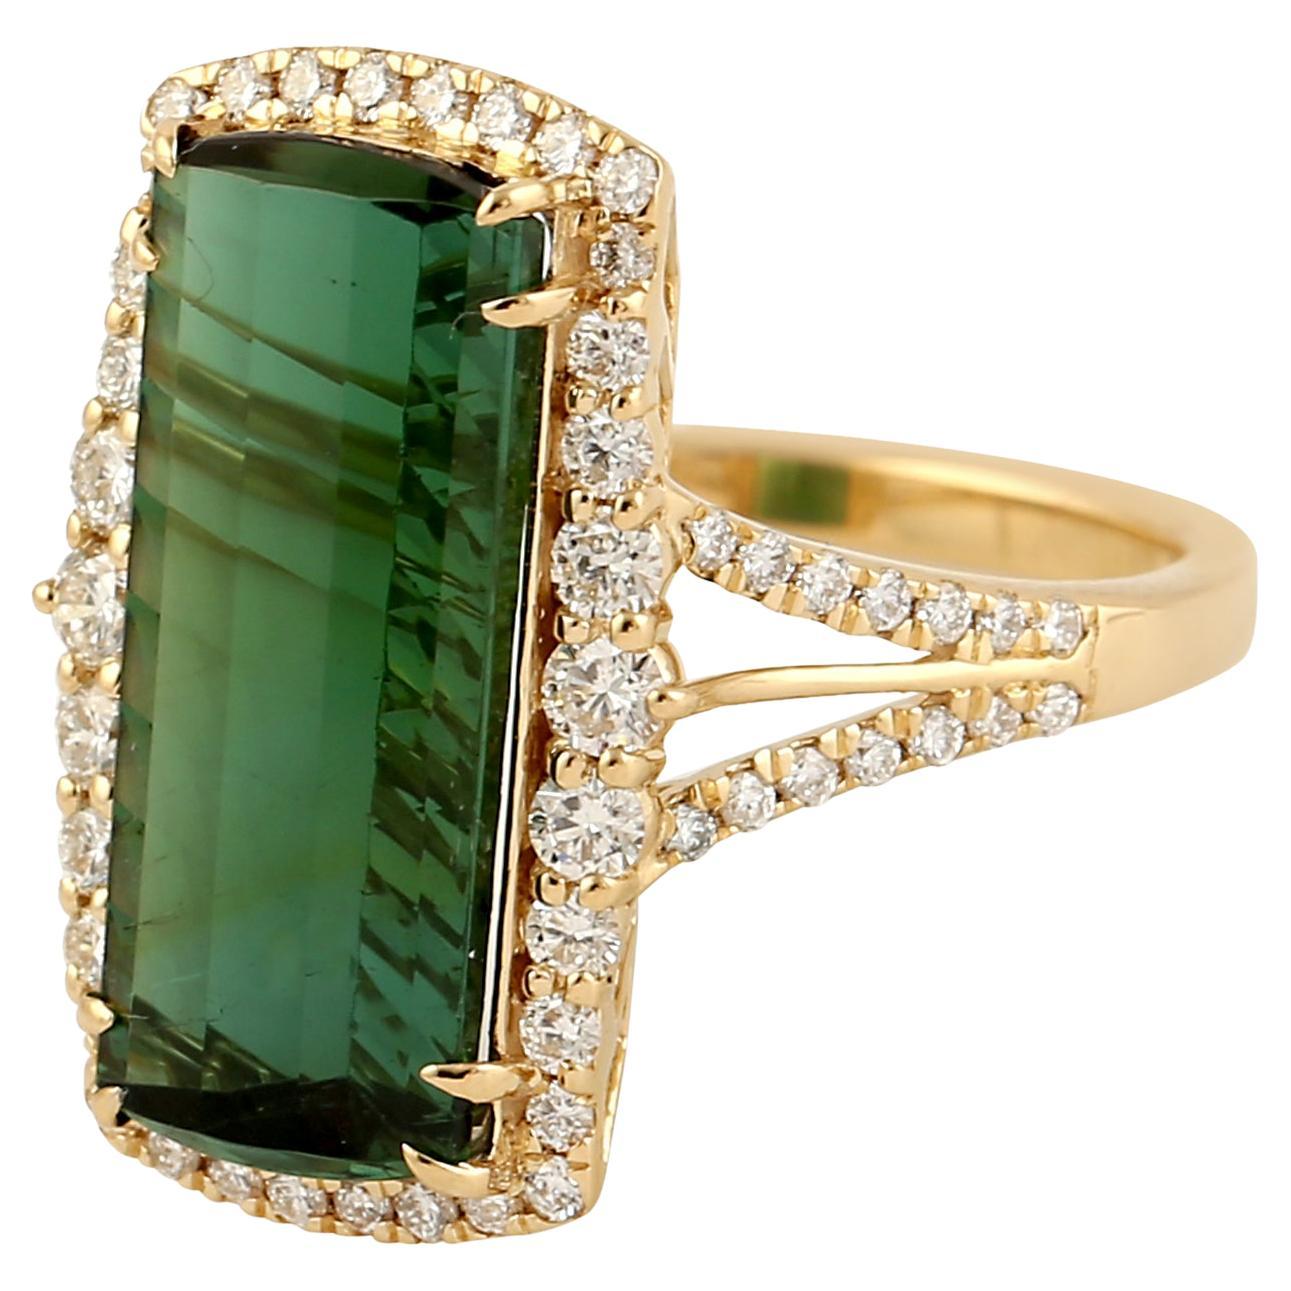 Green Tourmaline Cocktail Ring With Pave Diamonds Made In 18k yellow Gold